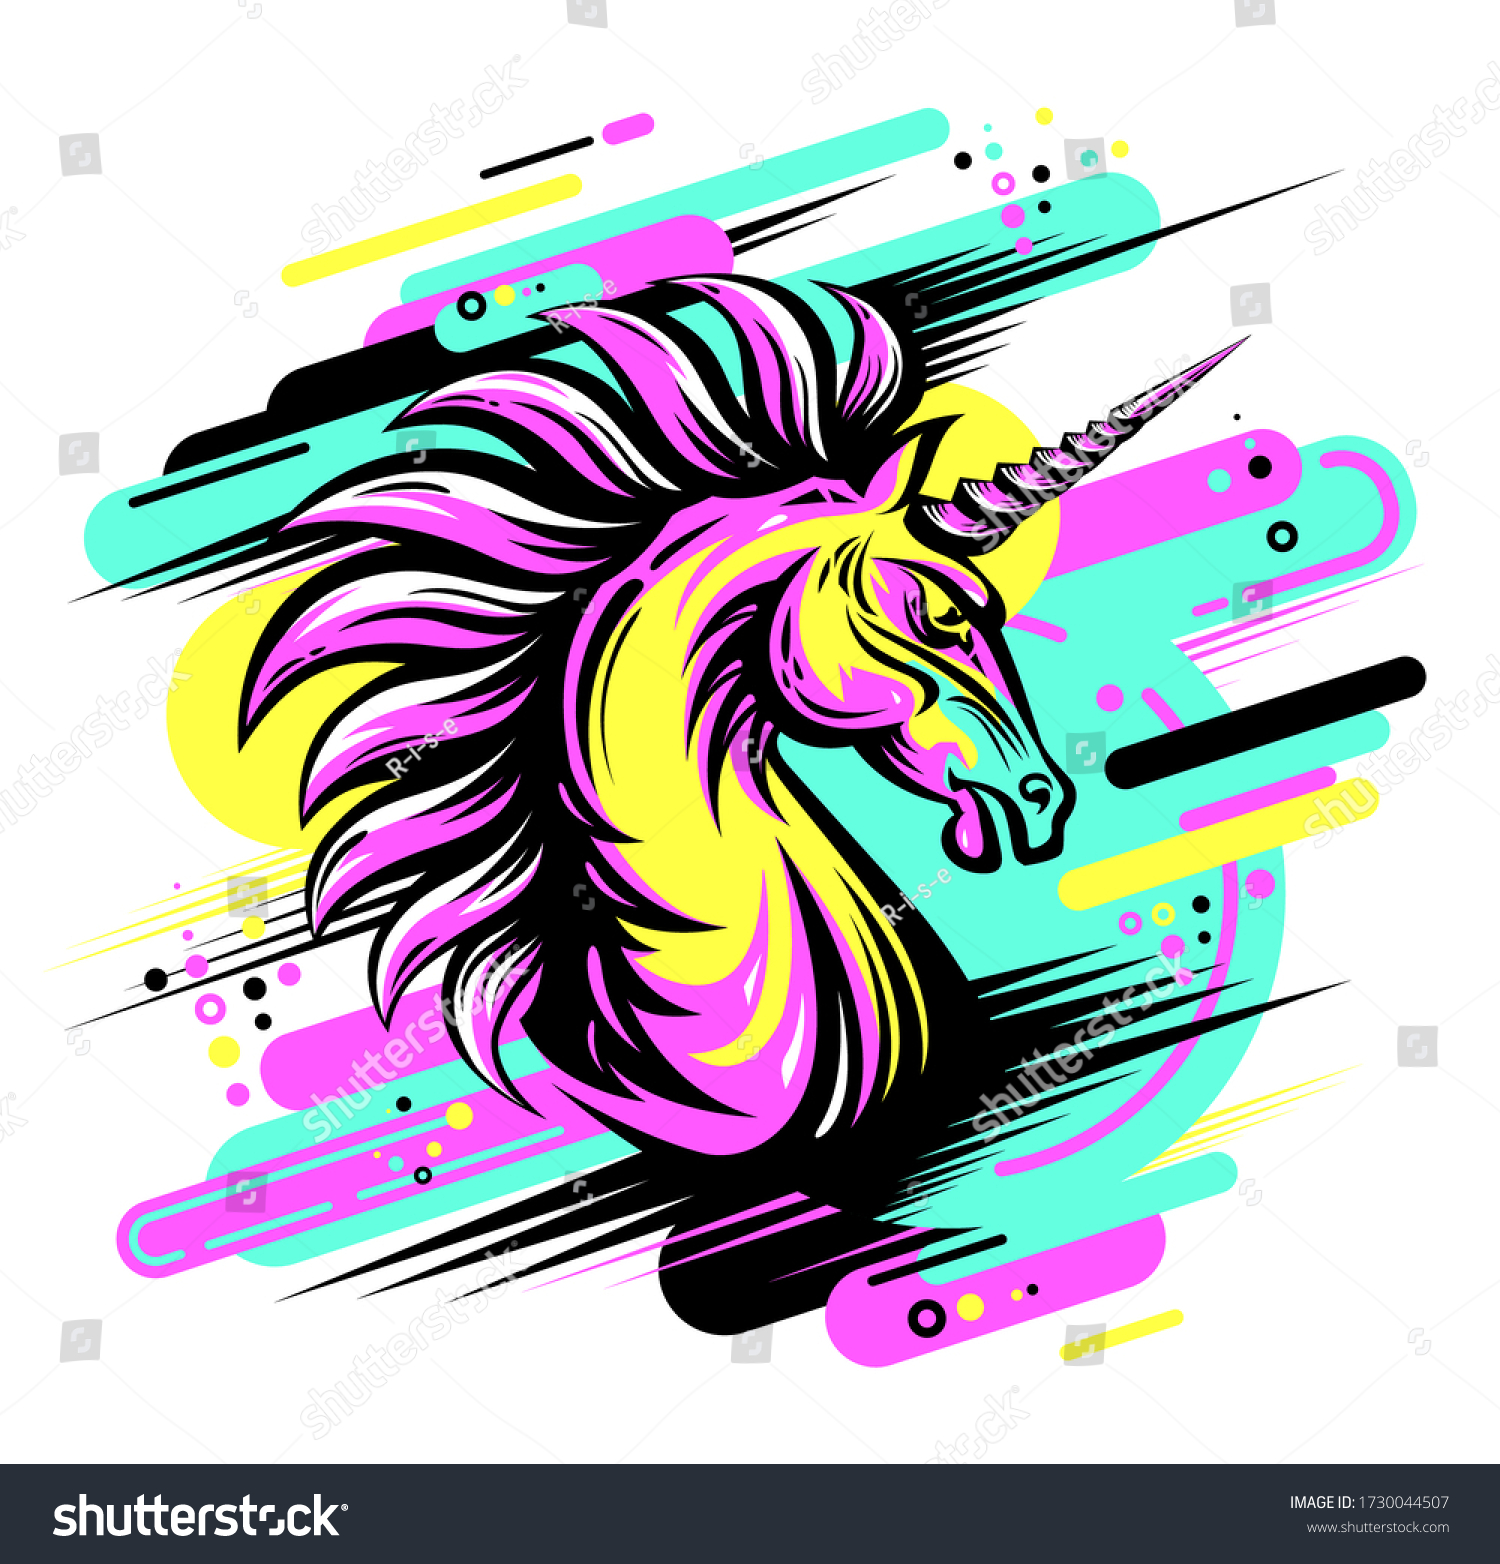 SVG of Cool bright print with angry Unicorn. Fury Magic animal colorful illustration. Vector art for apparel, textile design, fashion, mascot, sport team emblem, teenager stationery, accessories. Neon colors svg